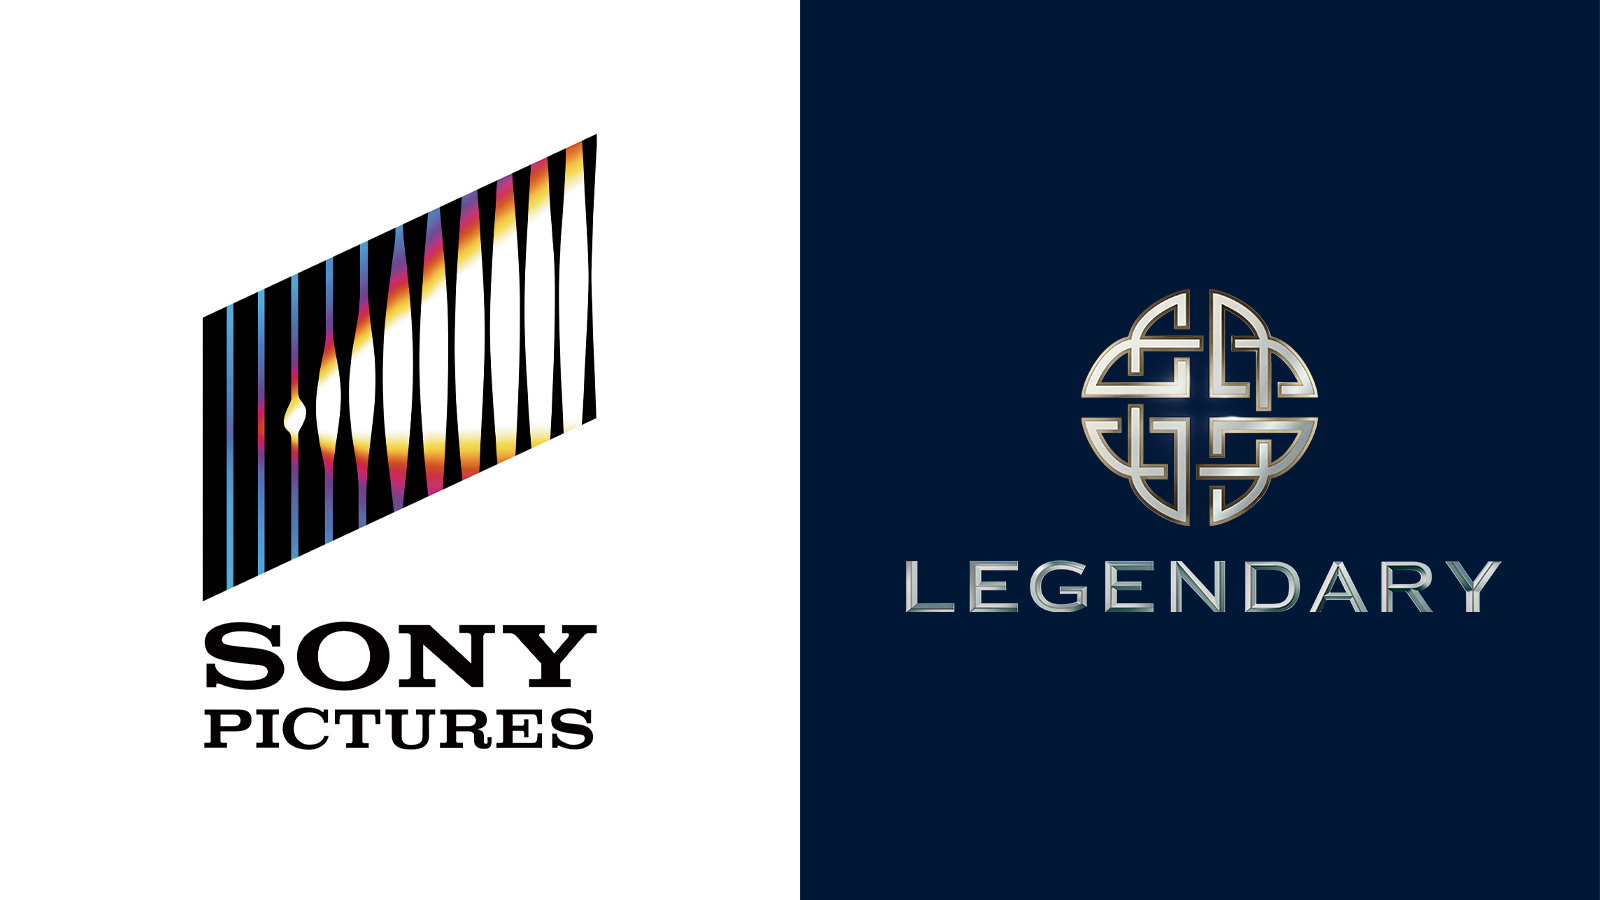 Legendary and Sony Pictures Announce New Multi-Year Worldwide Theatrical Film Distribution Partnership